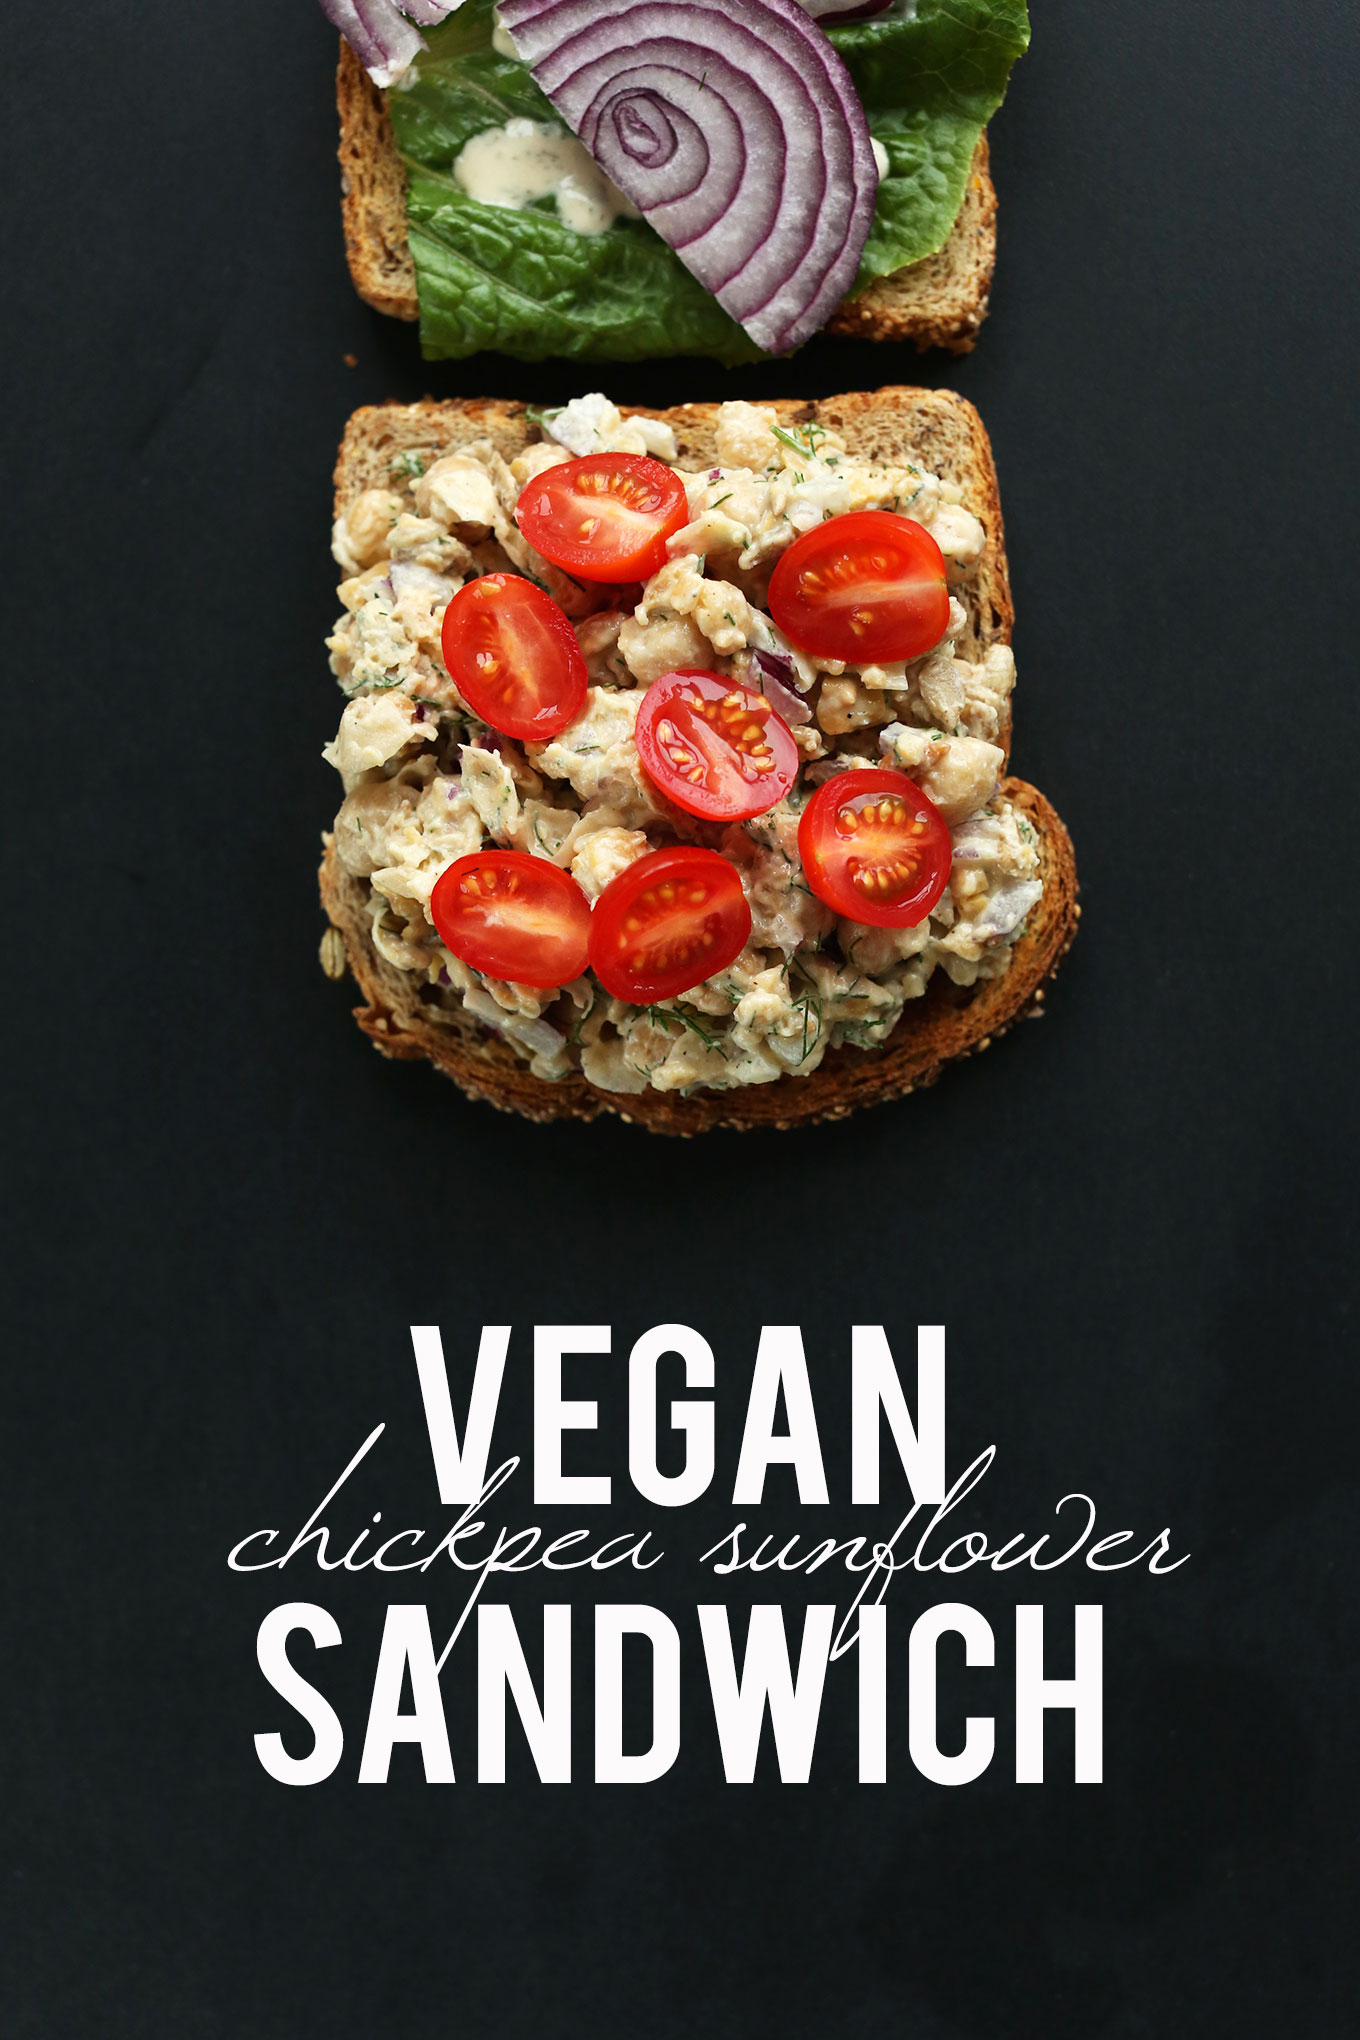 Vegan Chickpea Sunflower Sandwich for a simple lunch